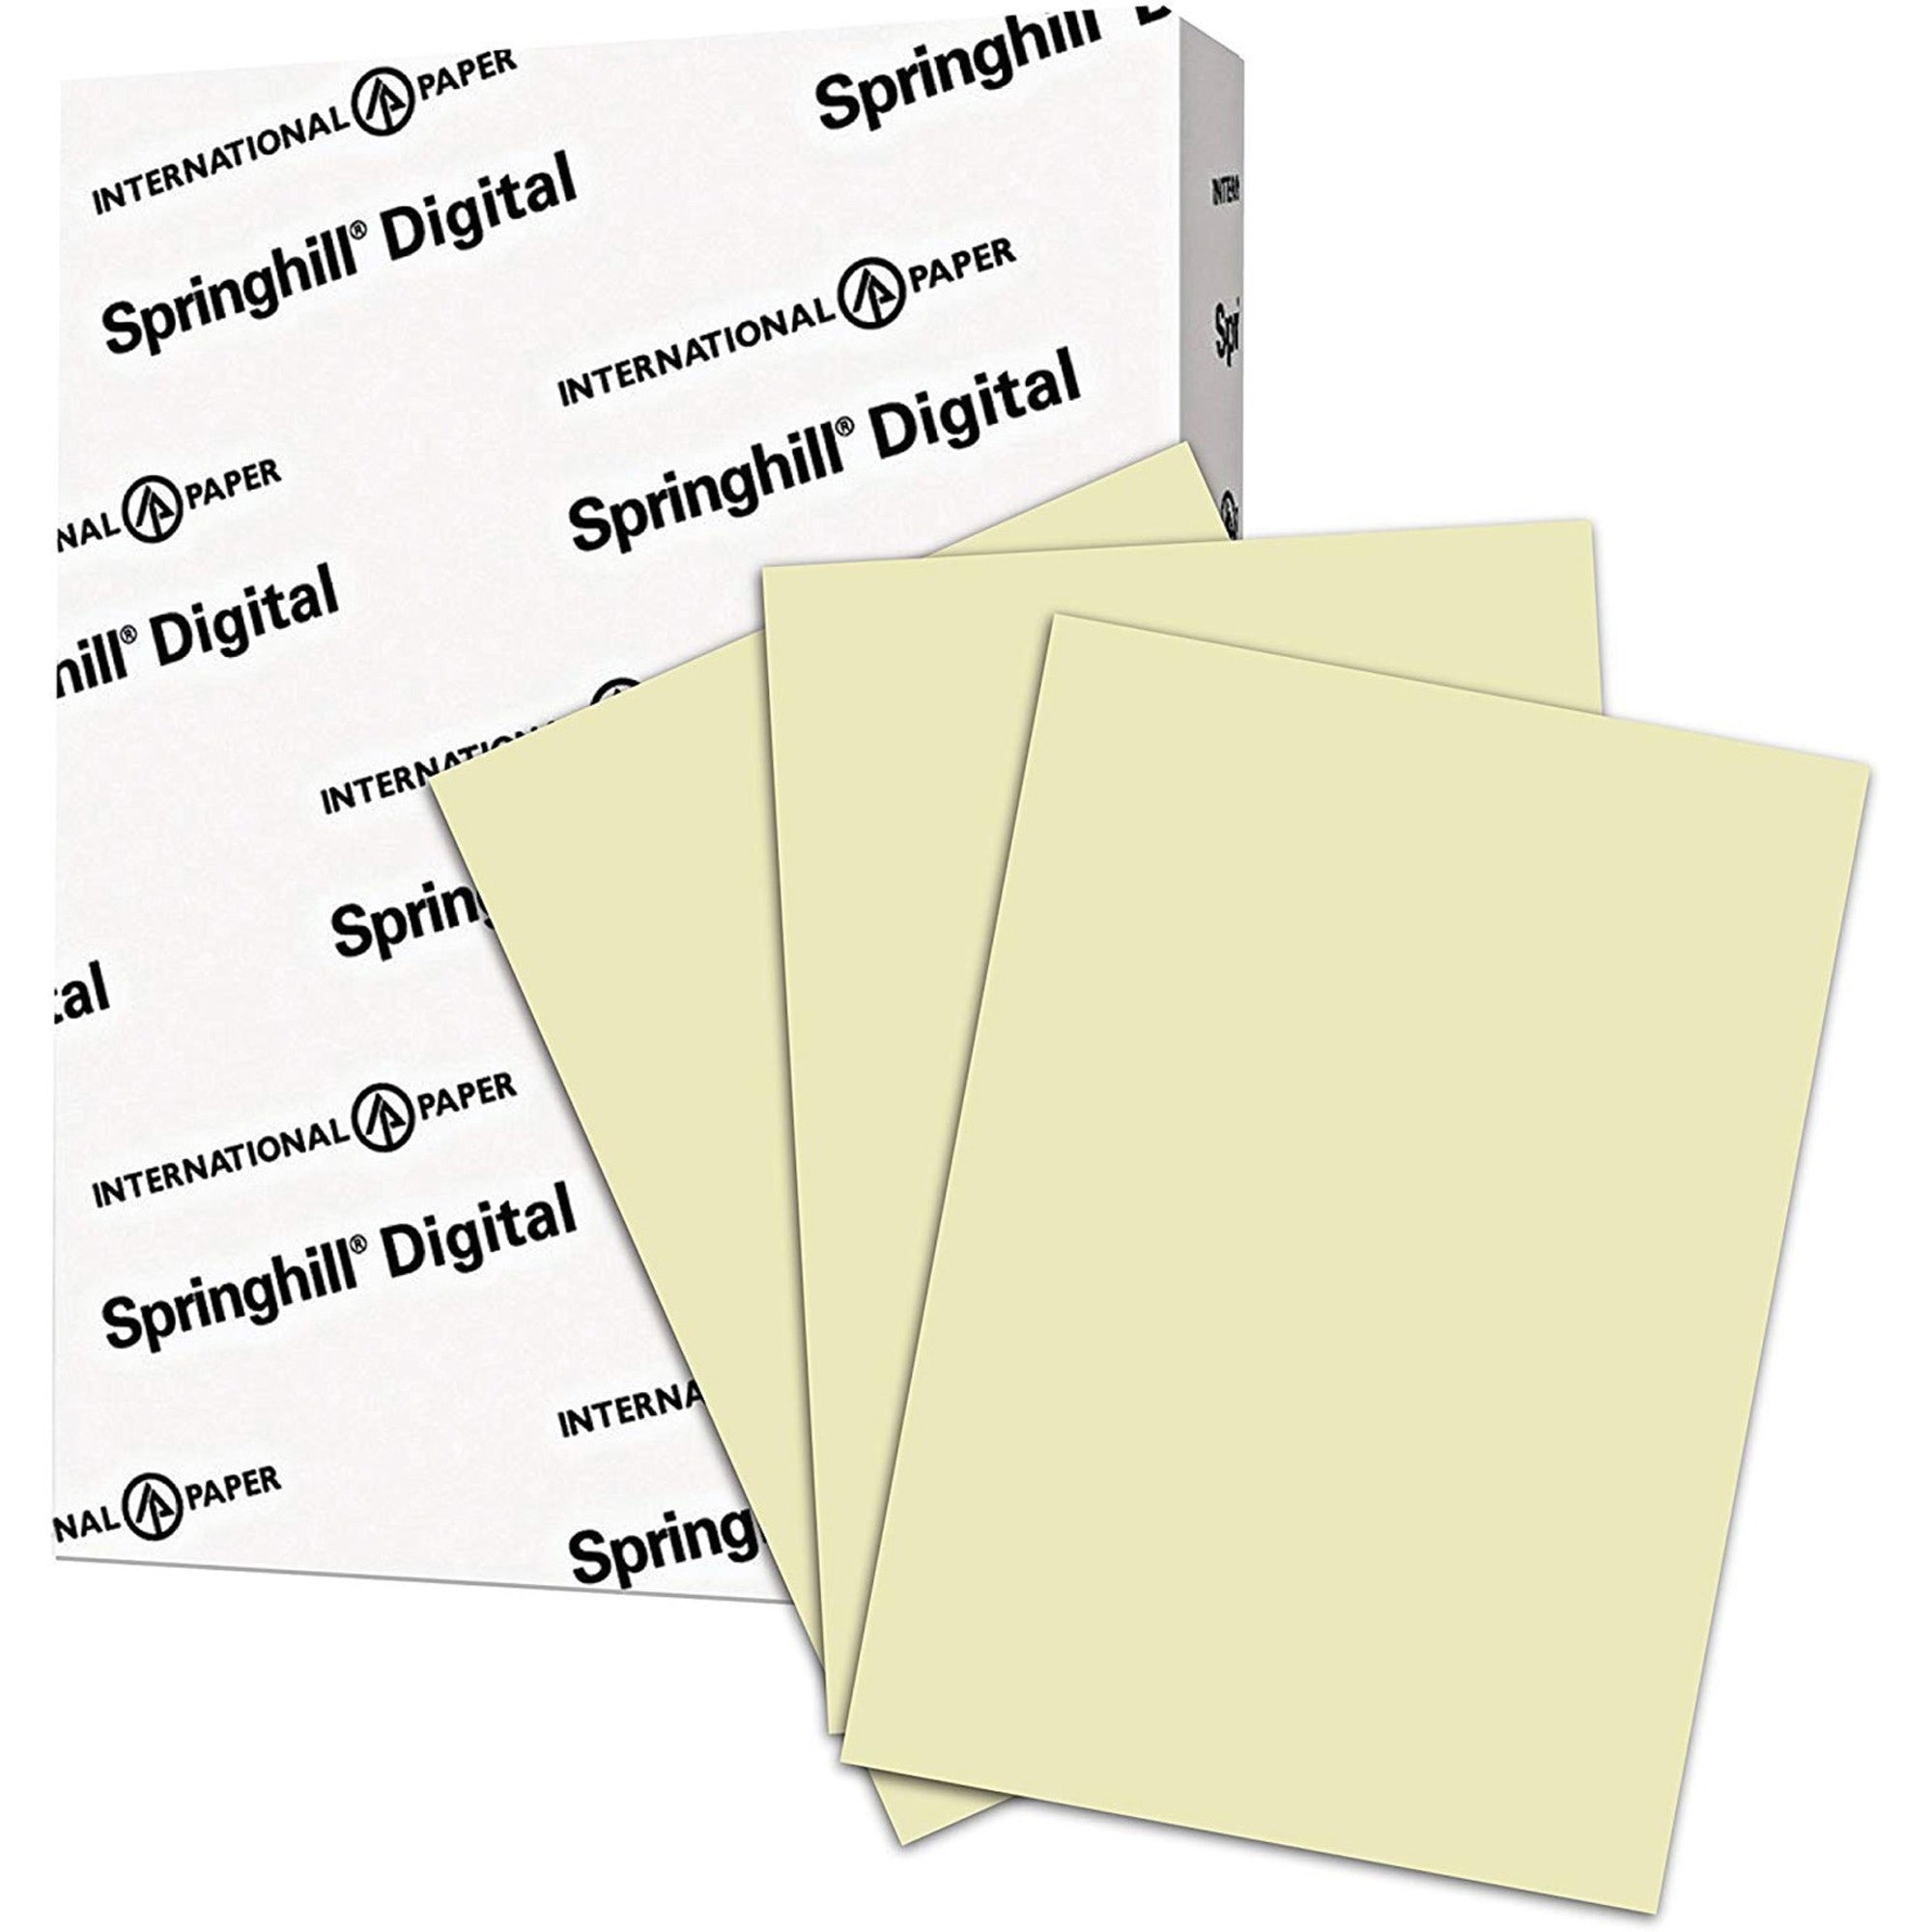 Springhill Multipurpose Cardstock - Ivory - 92 Brightness - Letter - 8 1/2" x 11" - 90 lb Basis Weight - Smooth, Hard - 250 / Pack - Acid-free - Ivory - 